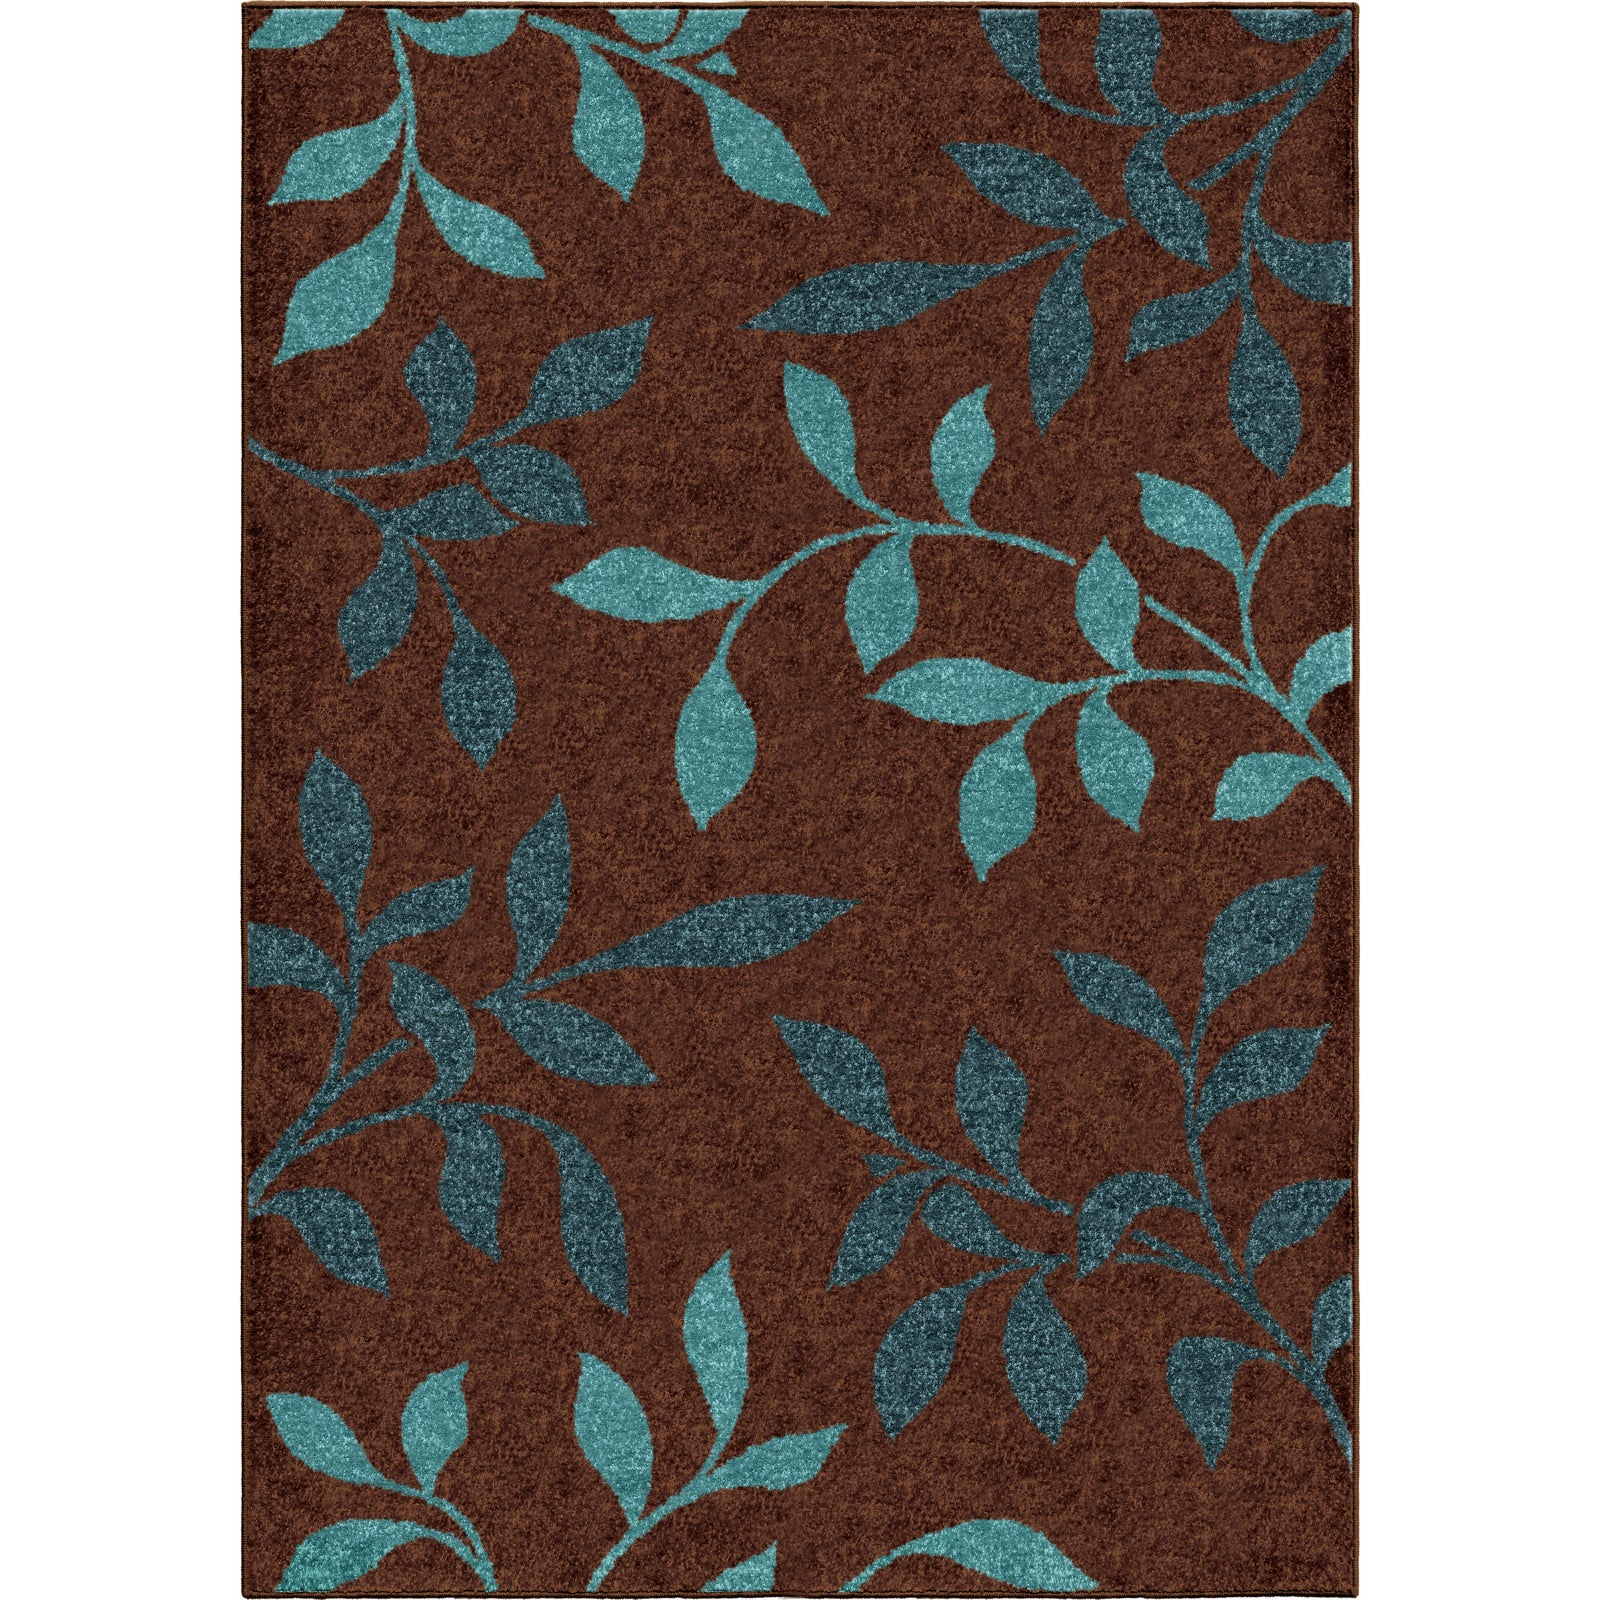 Orian Rugs Promise Dazzling Brown Area Rug main image